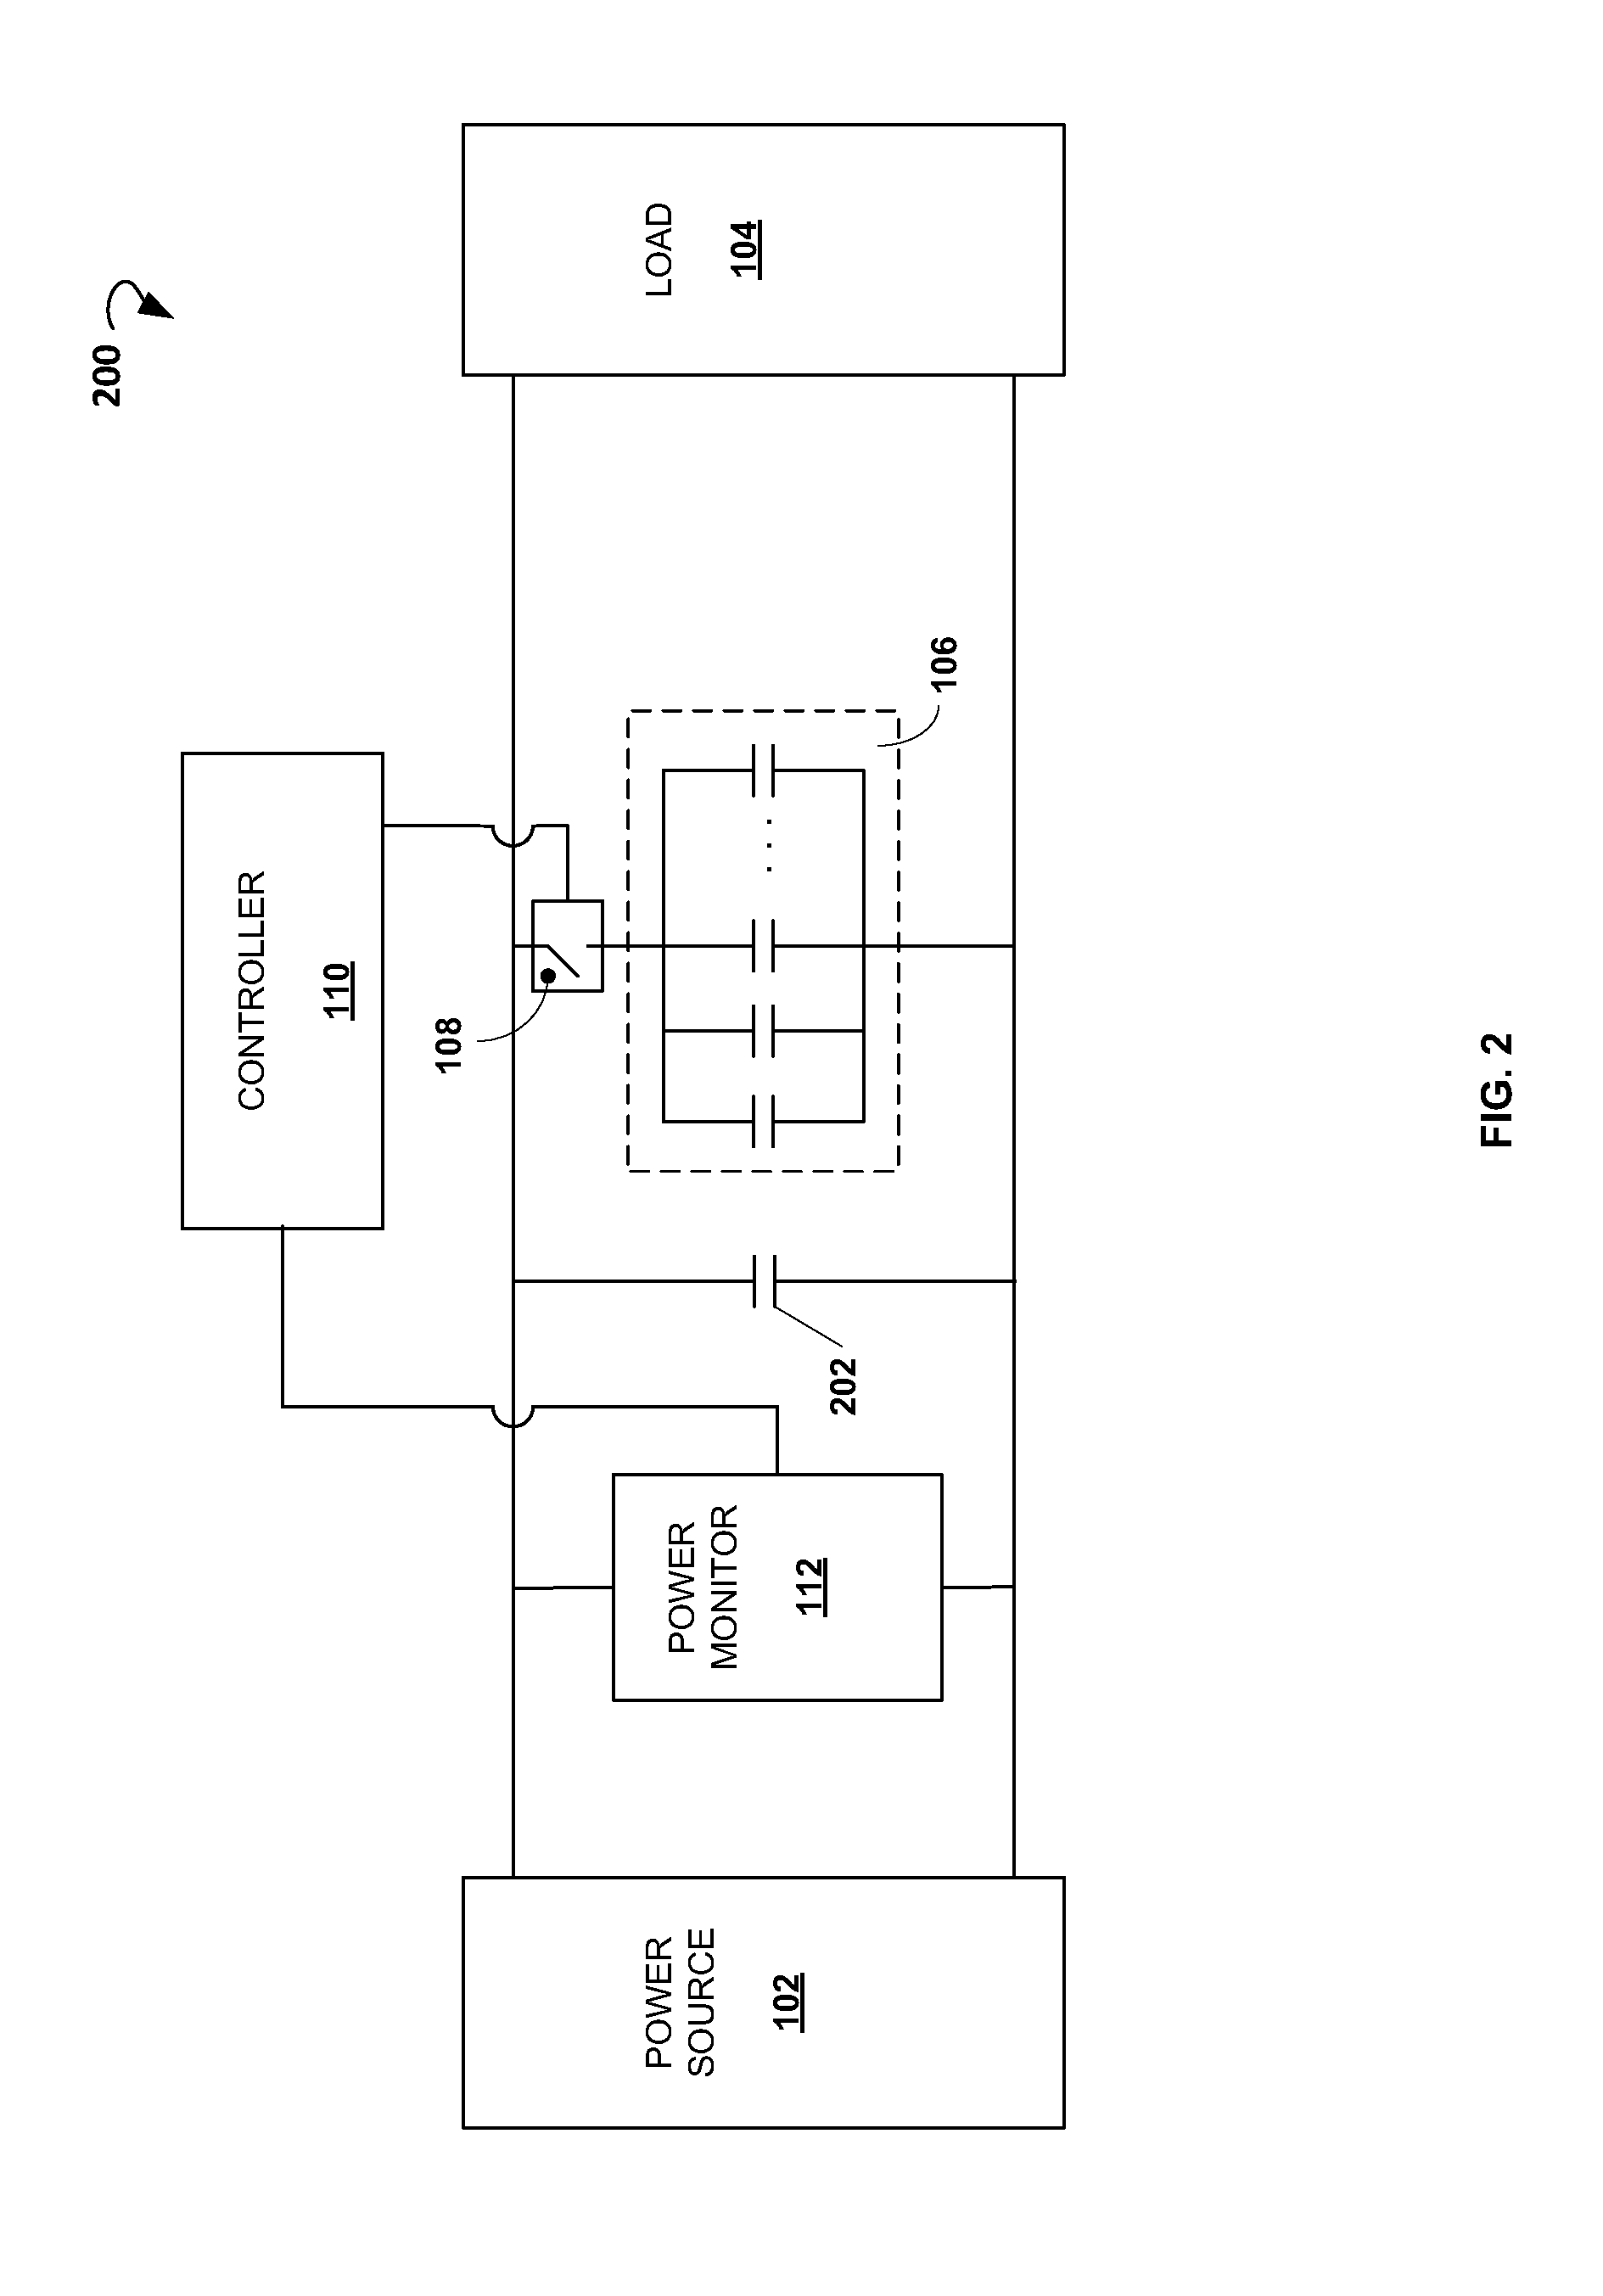 Switchable capacitor arrays for preventing power interruptions and extending backup power life